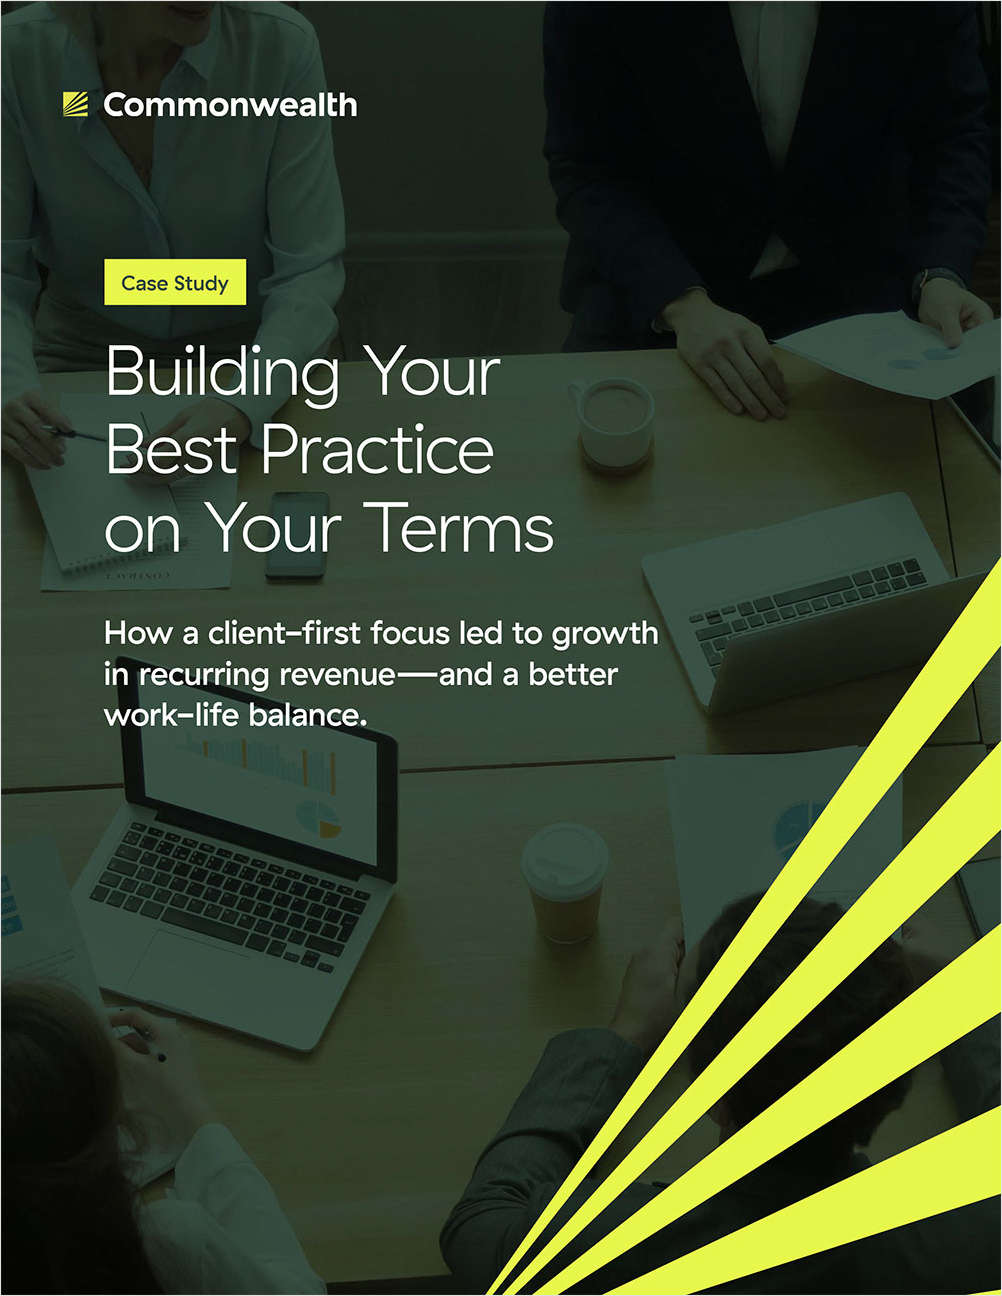 Building Your Best Practice on Your Terms